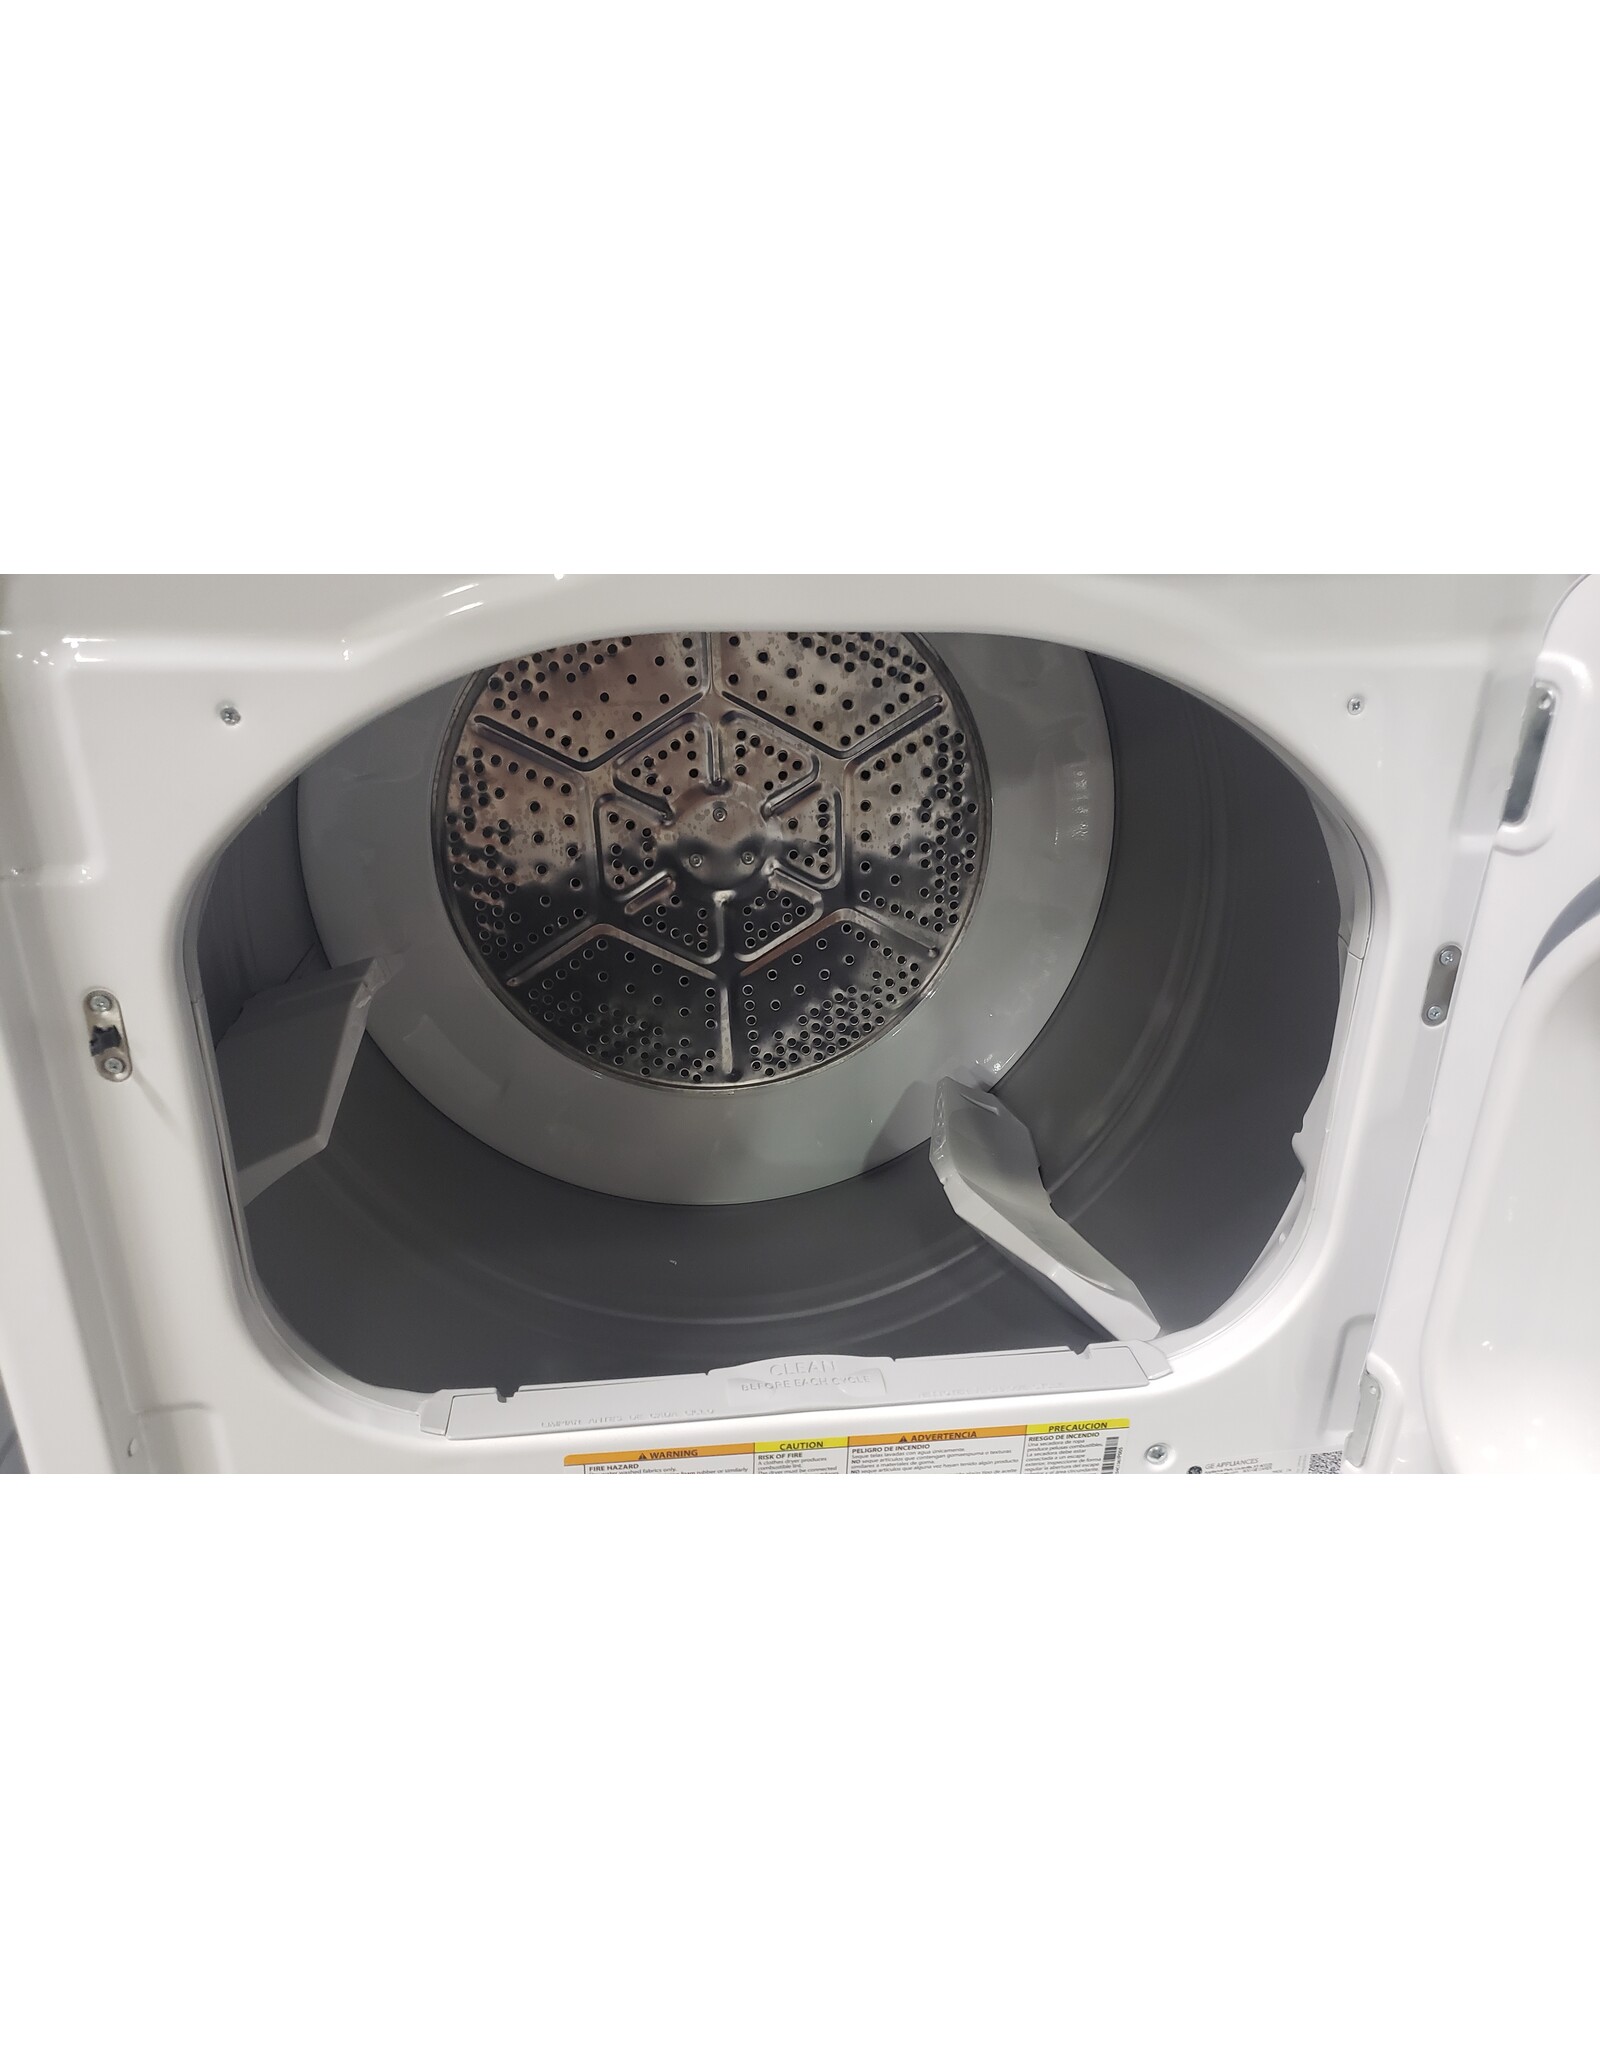 BWD Scratch & Dent GE Electric Dryer GTX22EASKWW